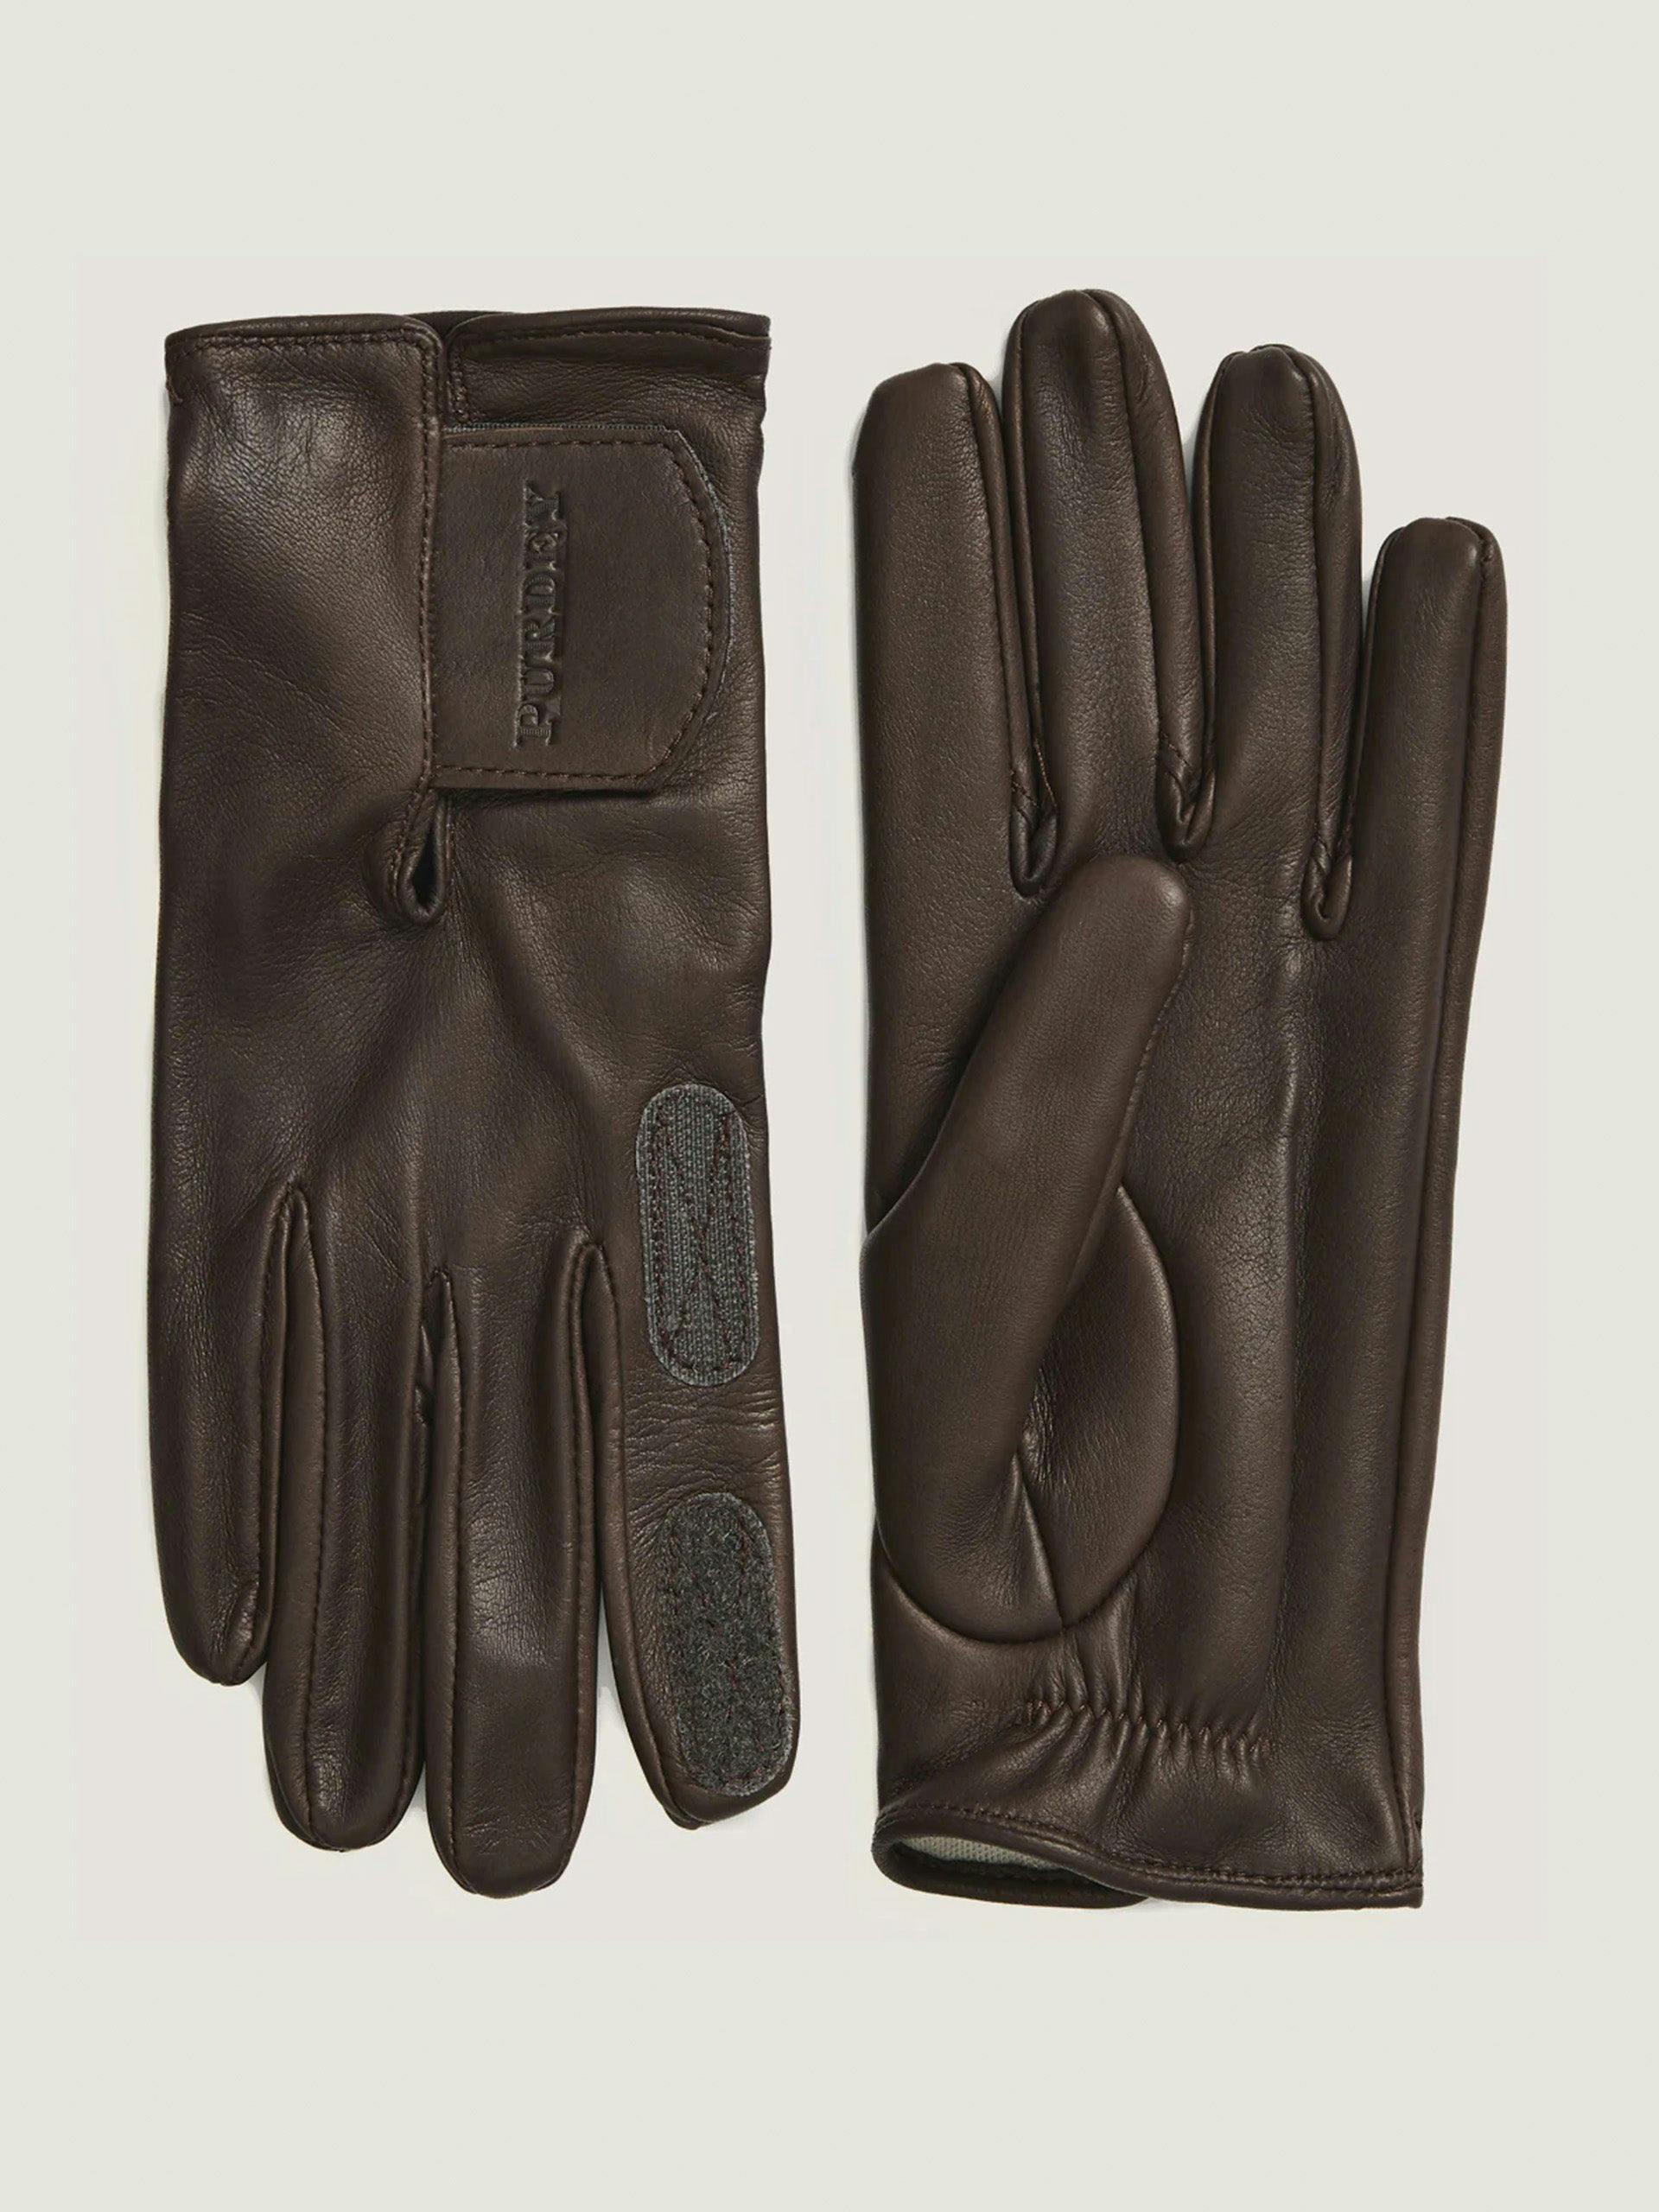 Cape leather sporting glove